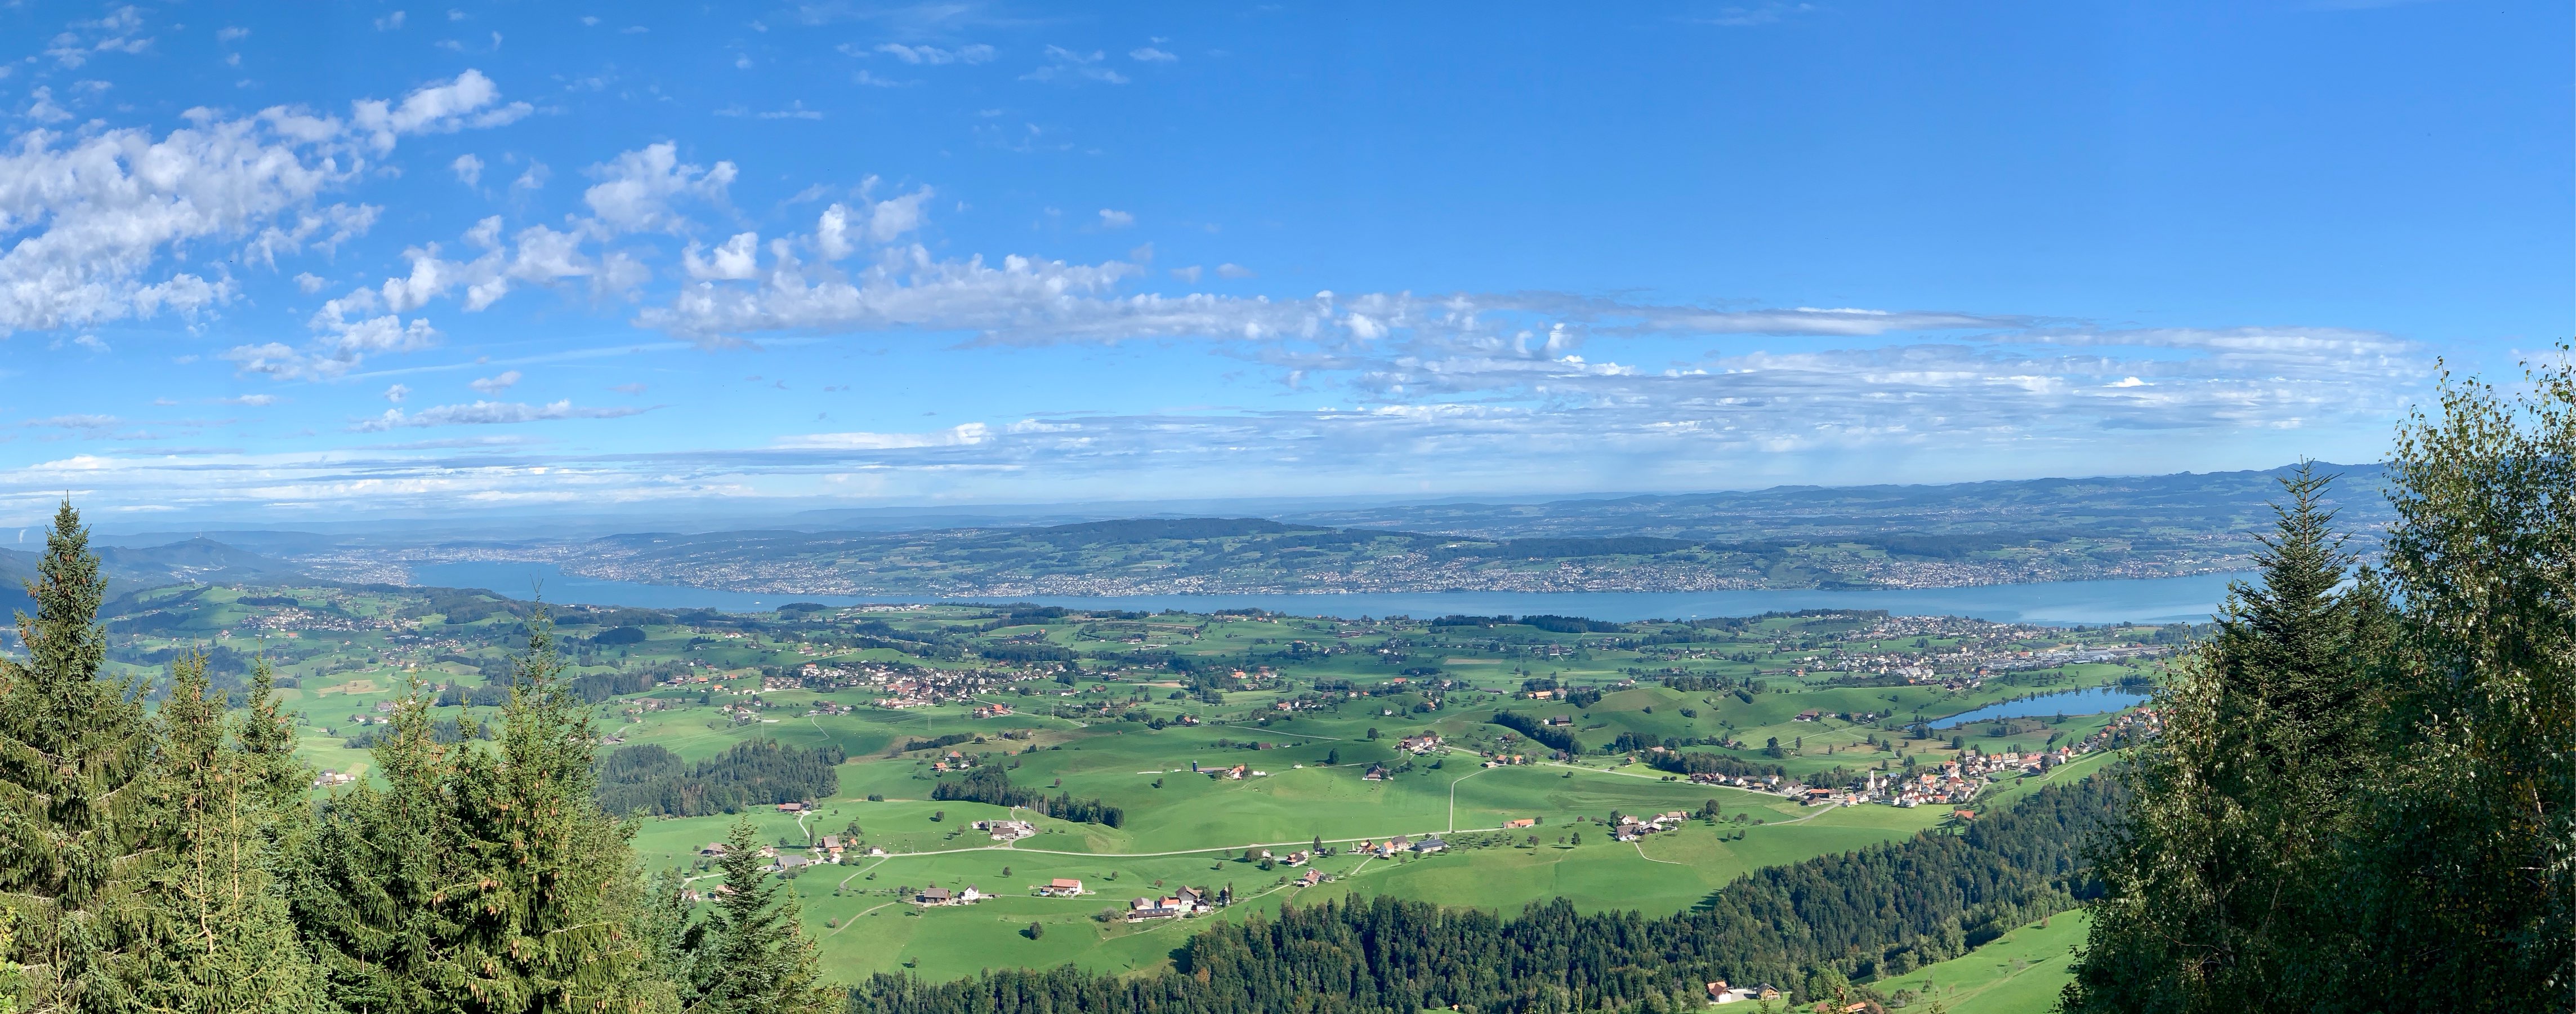 Lanscape view of green farm pastures interspersed with small woods. Lake Zürich, long and skinny, runs left-to-right in the distance. The sky is blue with a few white clouds.